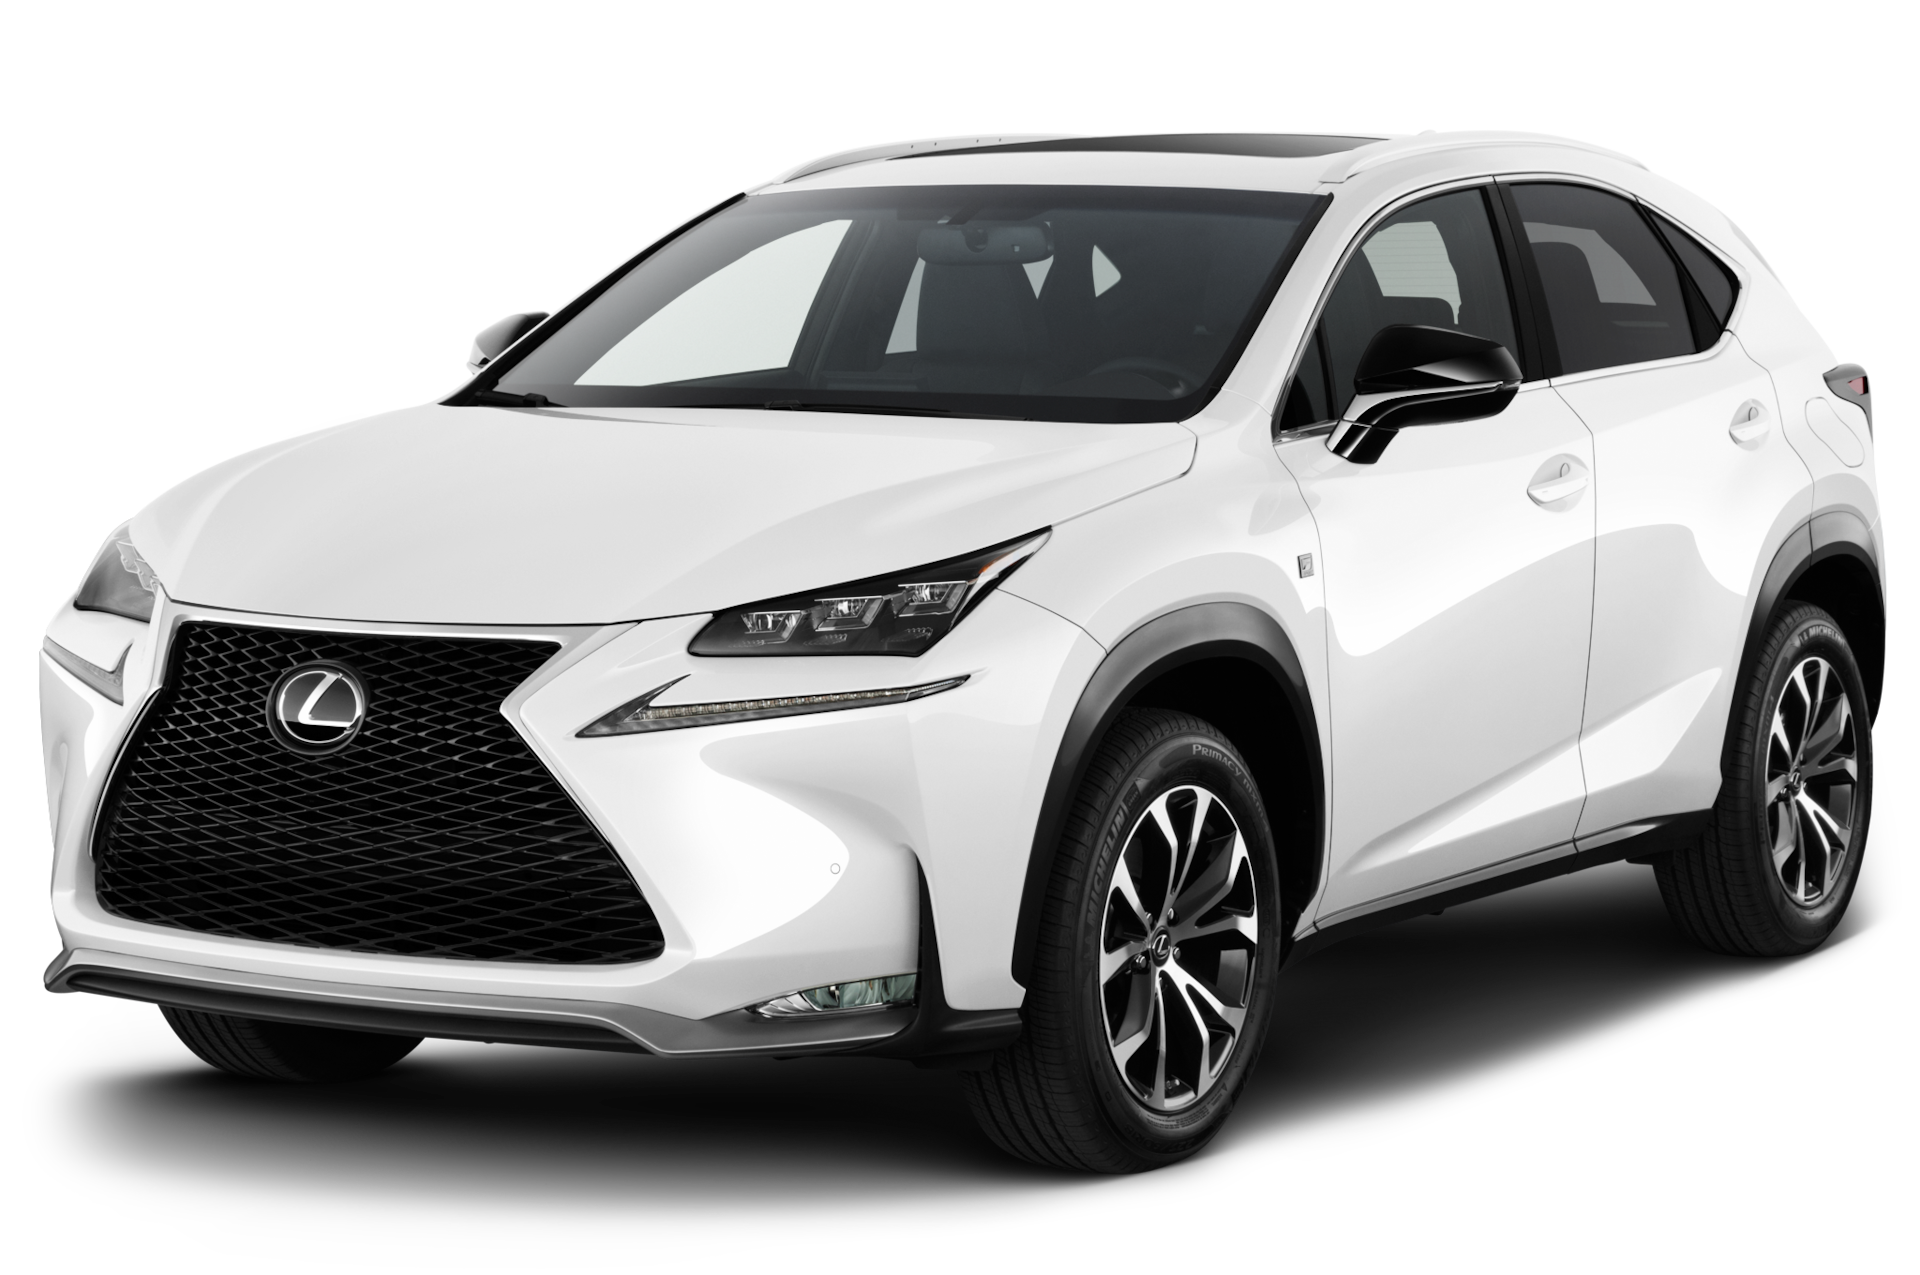 2017 Lexus NX300h Prices, Reviews, and Photos - MotorTrend